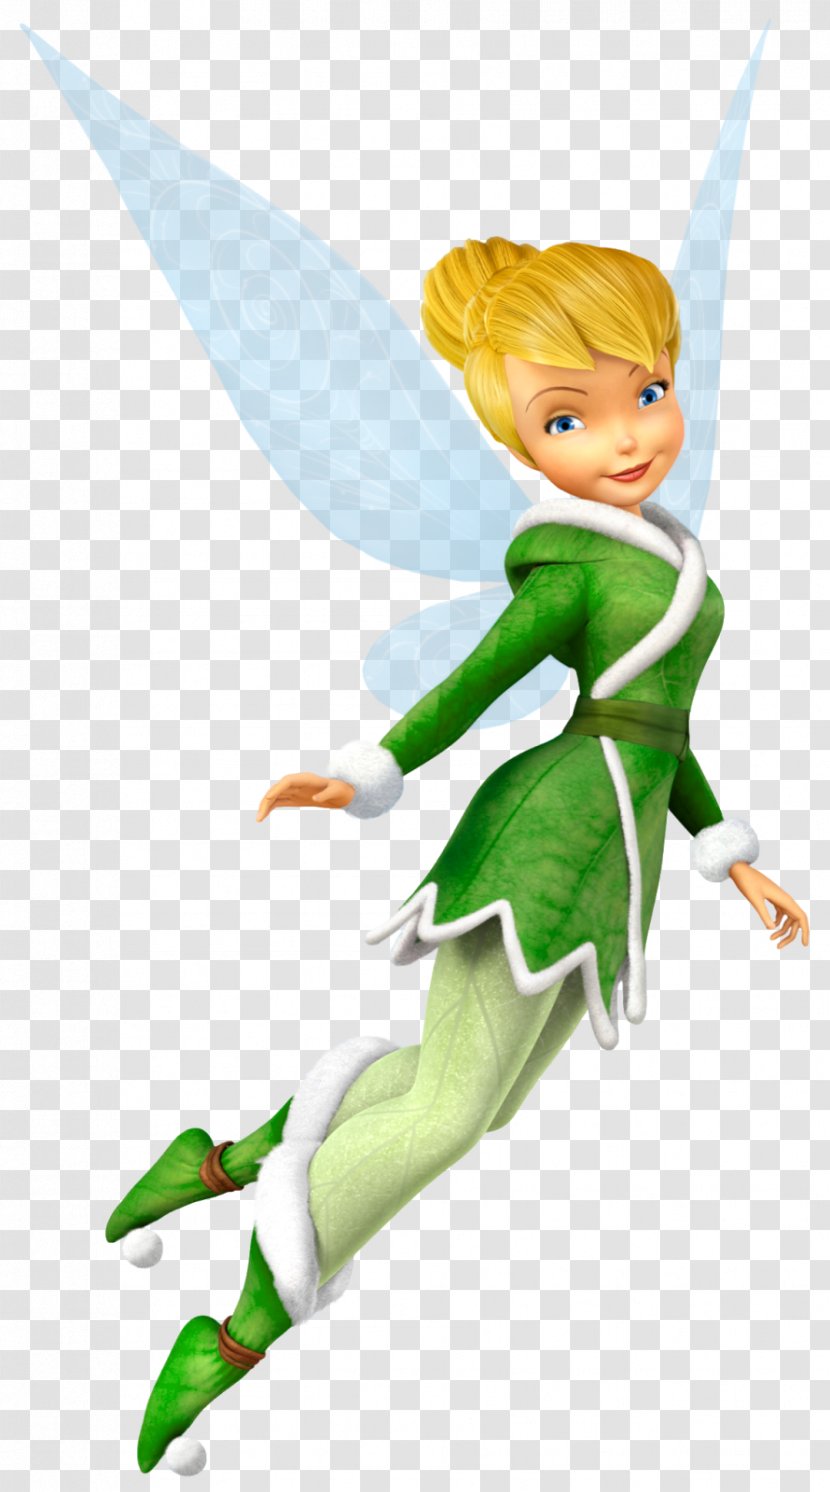 Freshly-Picked Tingle's Rosy Rupeeland Pixie Hollow Tinker Bell Disney Fairies Queen Clarion - Mythical Creature - Fairy Transparent PNG